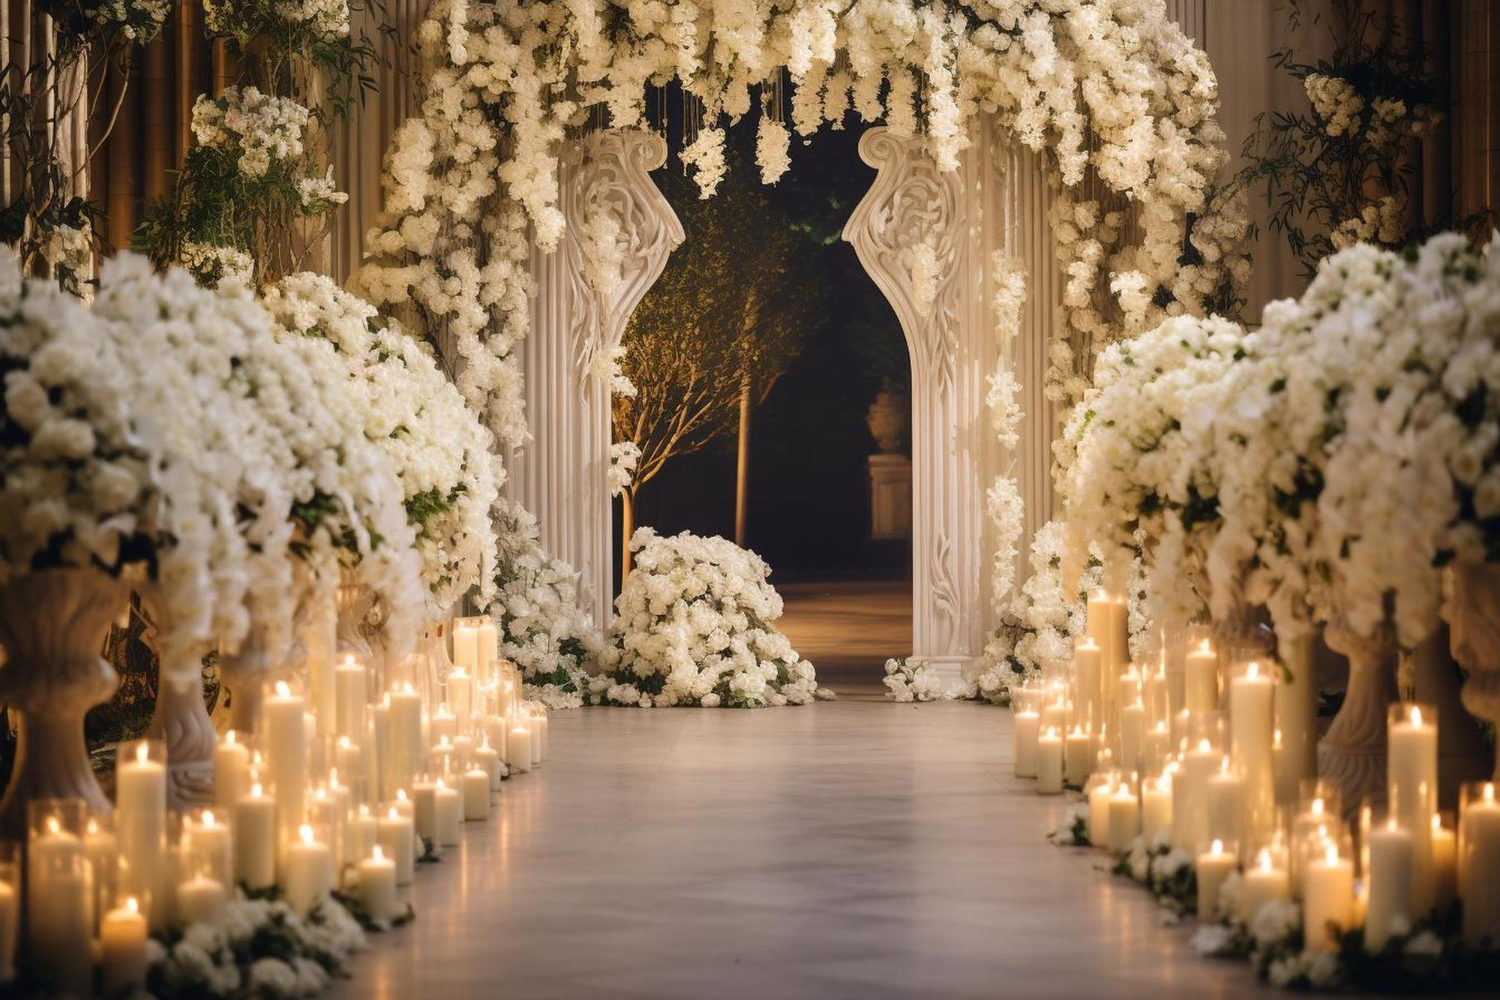 A romantic ceremony with candles lit up at night.